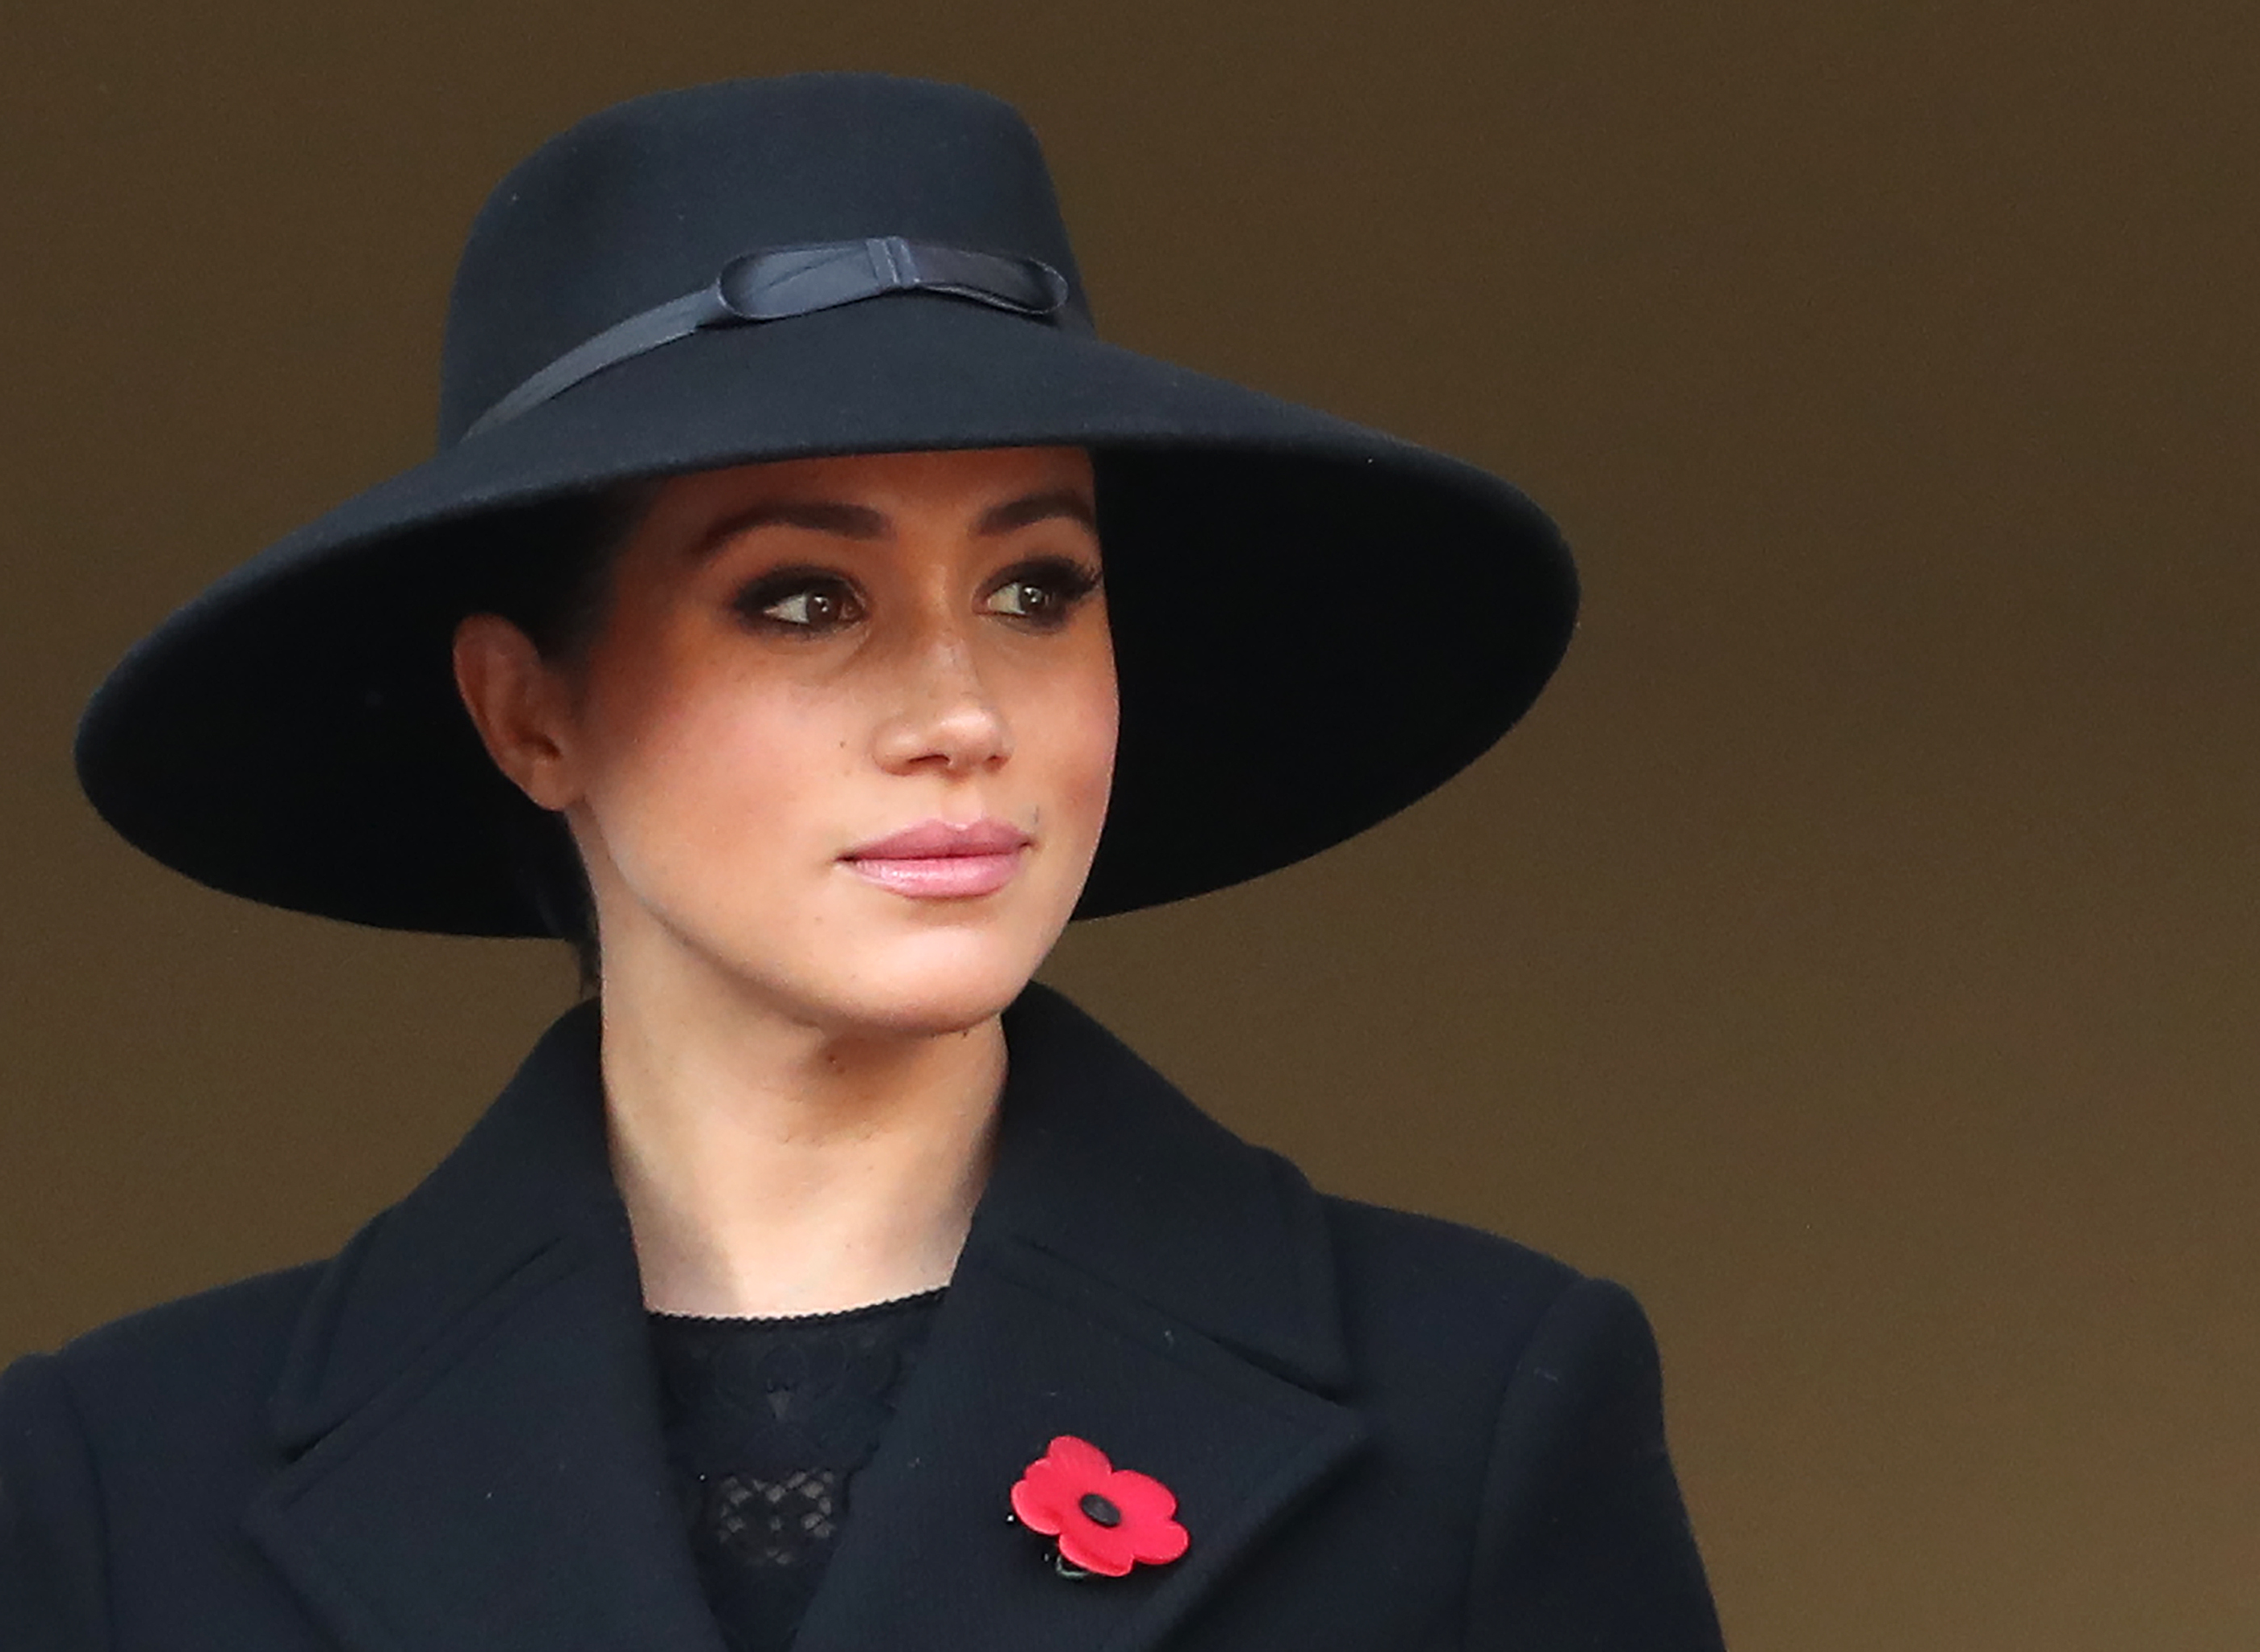 Meghan Markle at the annual Remembrance Sunday memorial in London, 2019 | Source: Getty Images